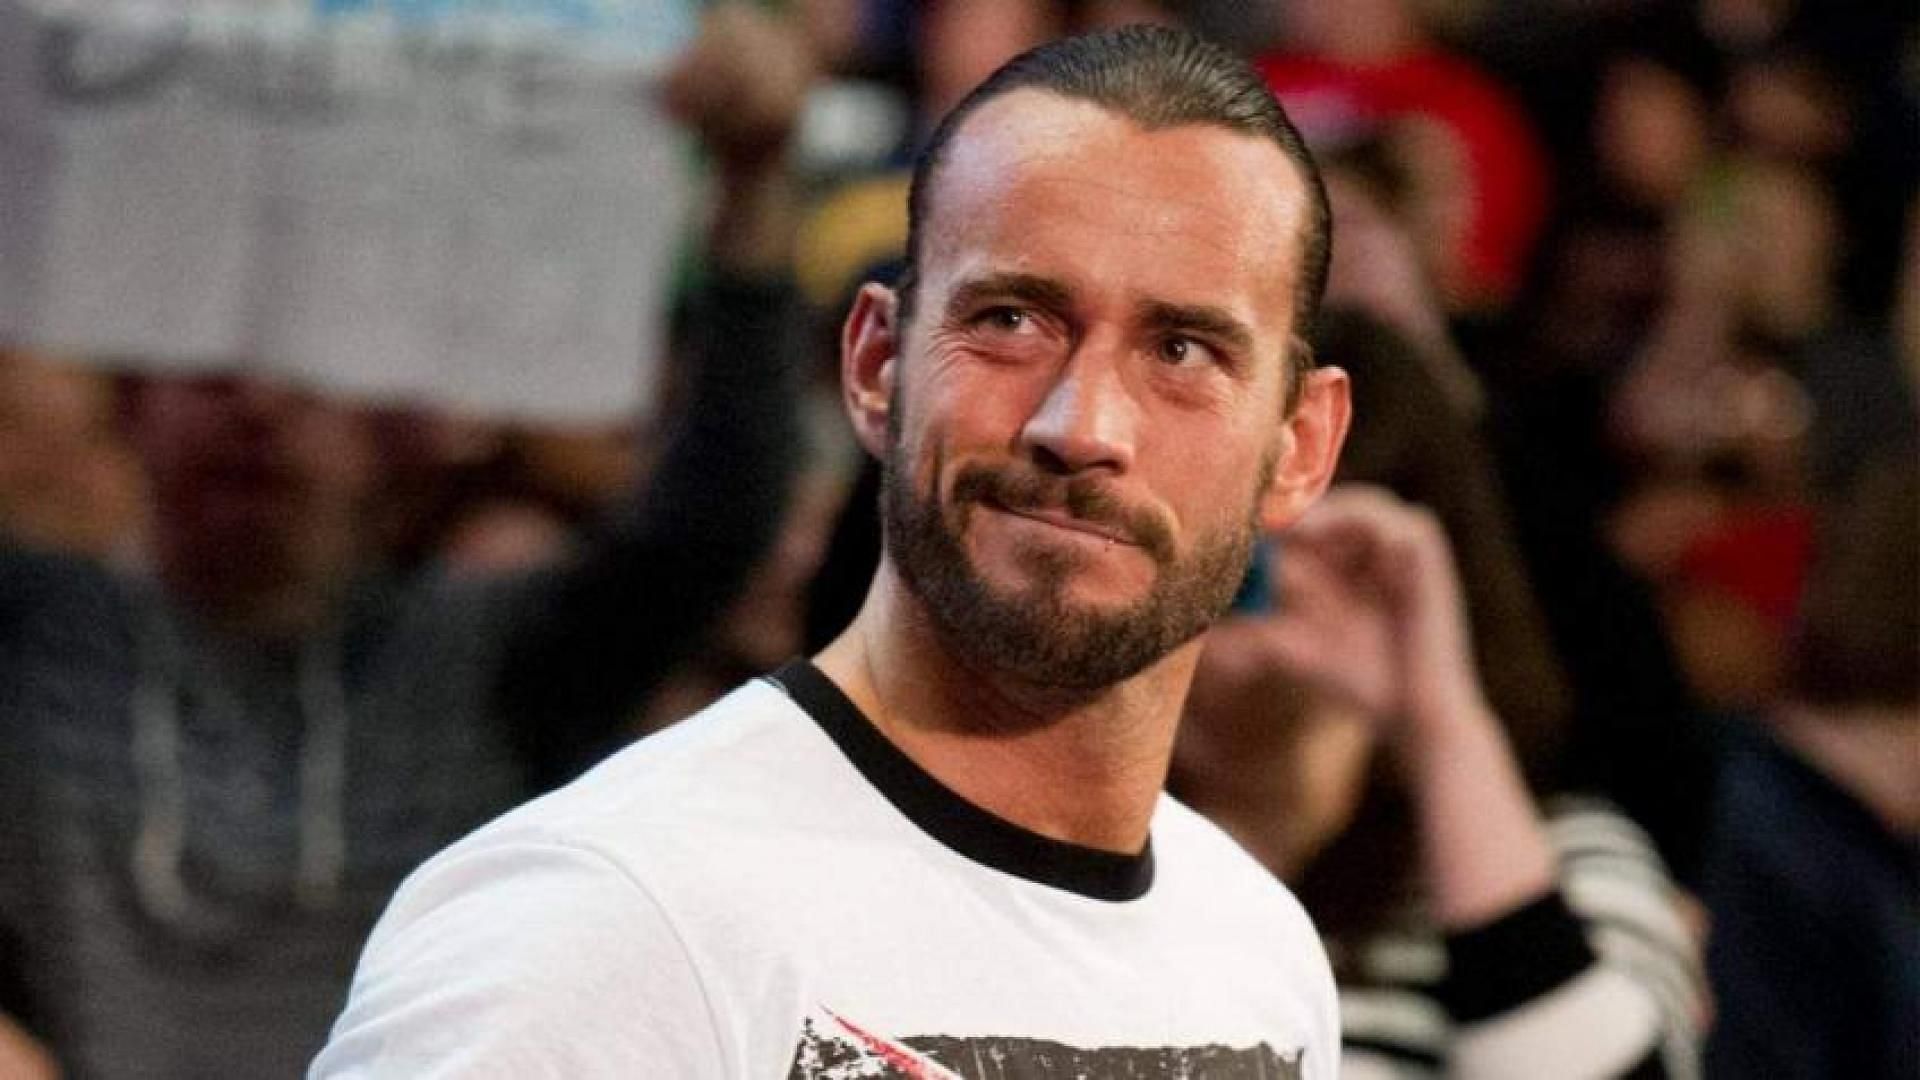 CM Punk reflects on an iconic rivalry.